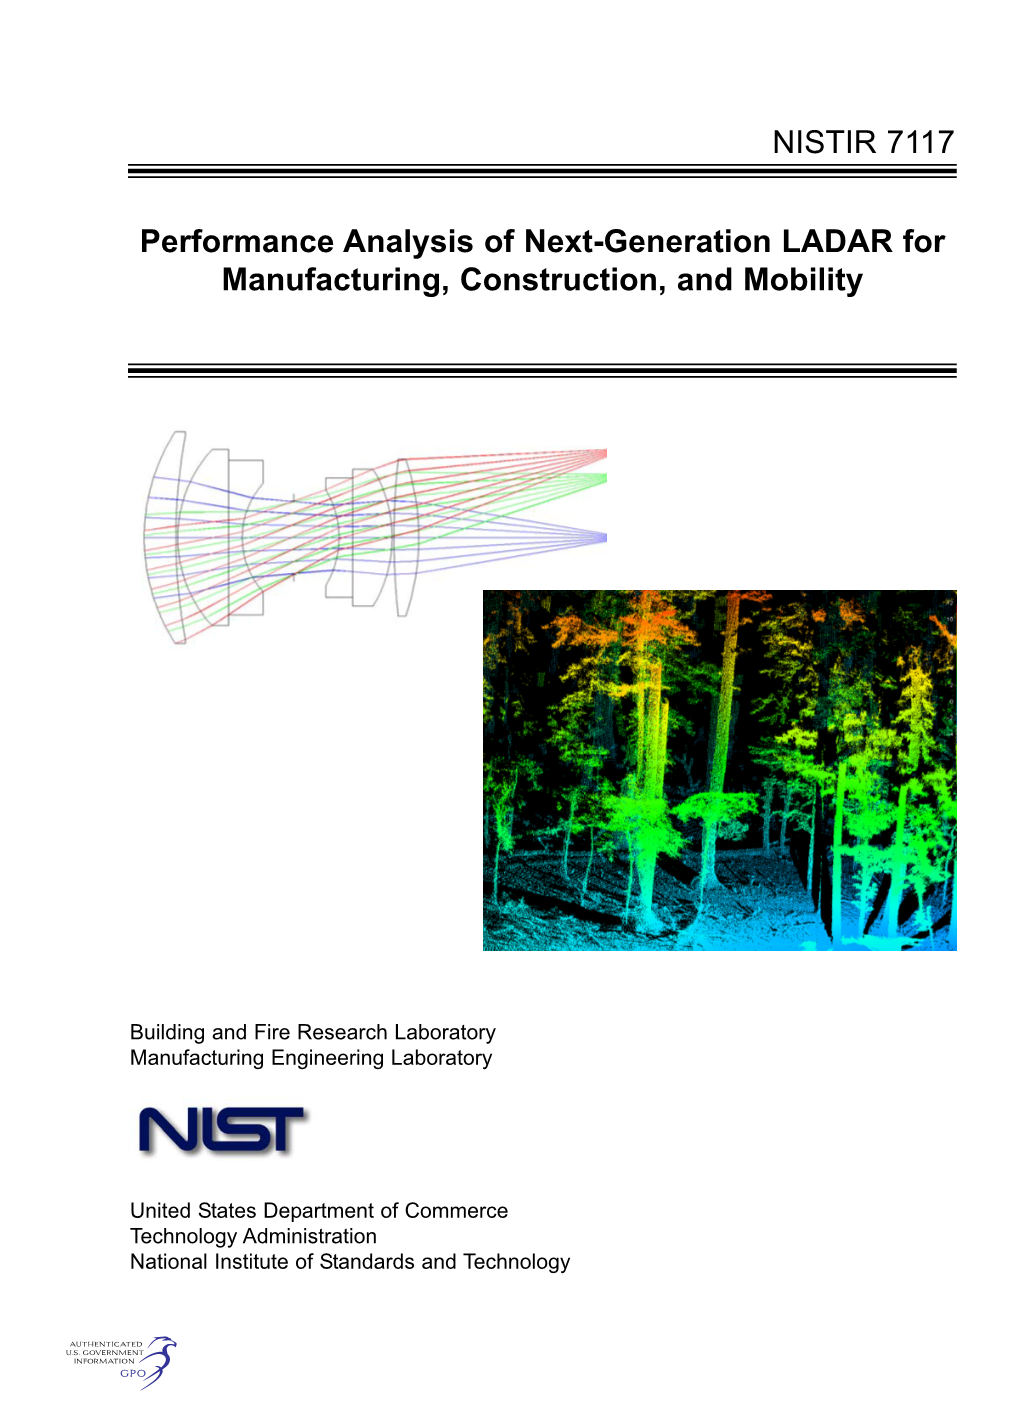 Performance Analysis of Next-Generation LADAR for Manufacturing, Construction, and Mobility